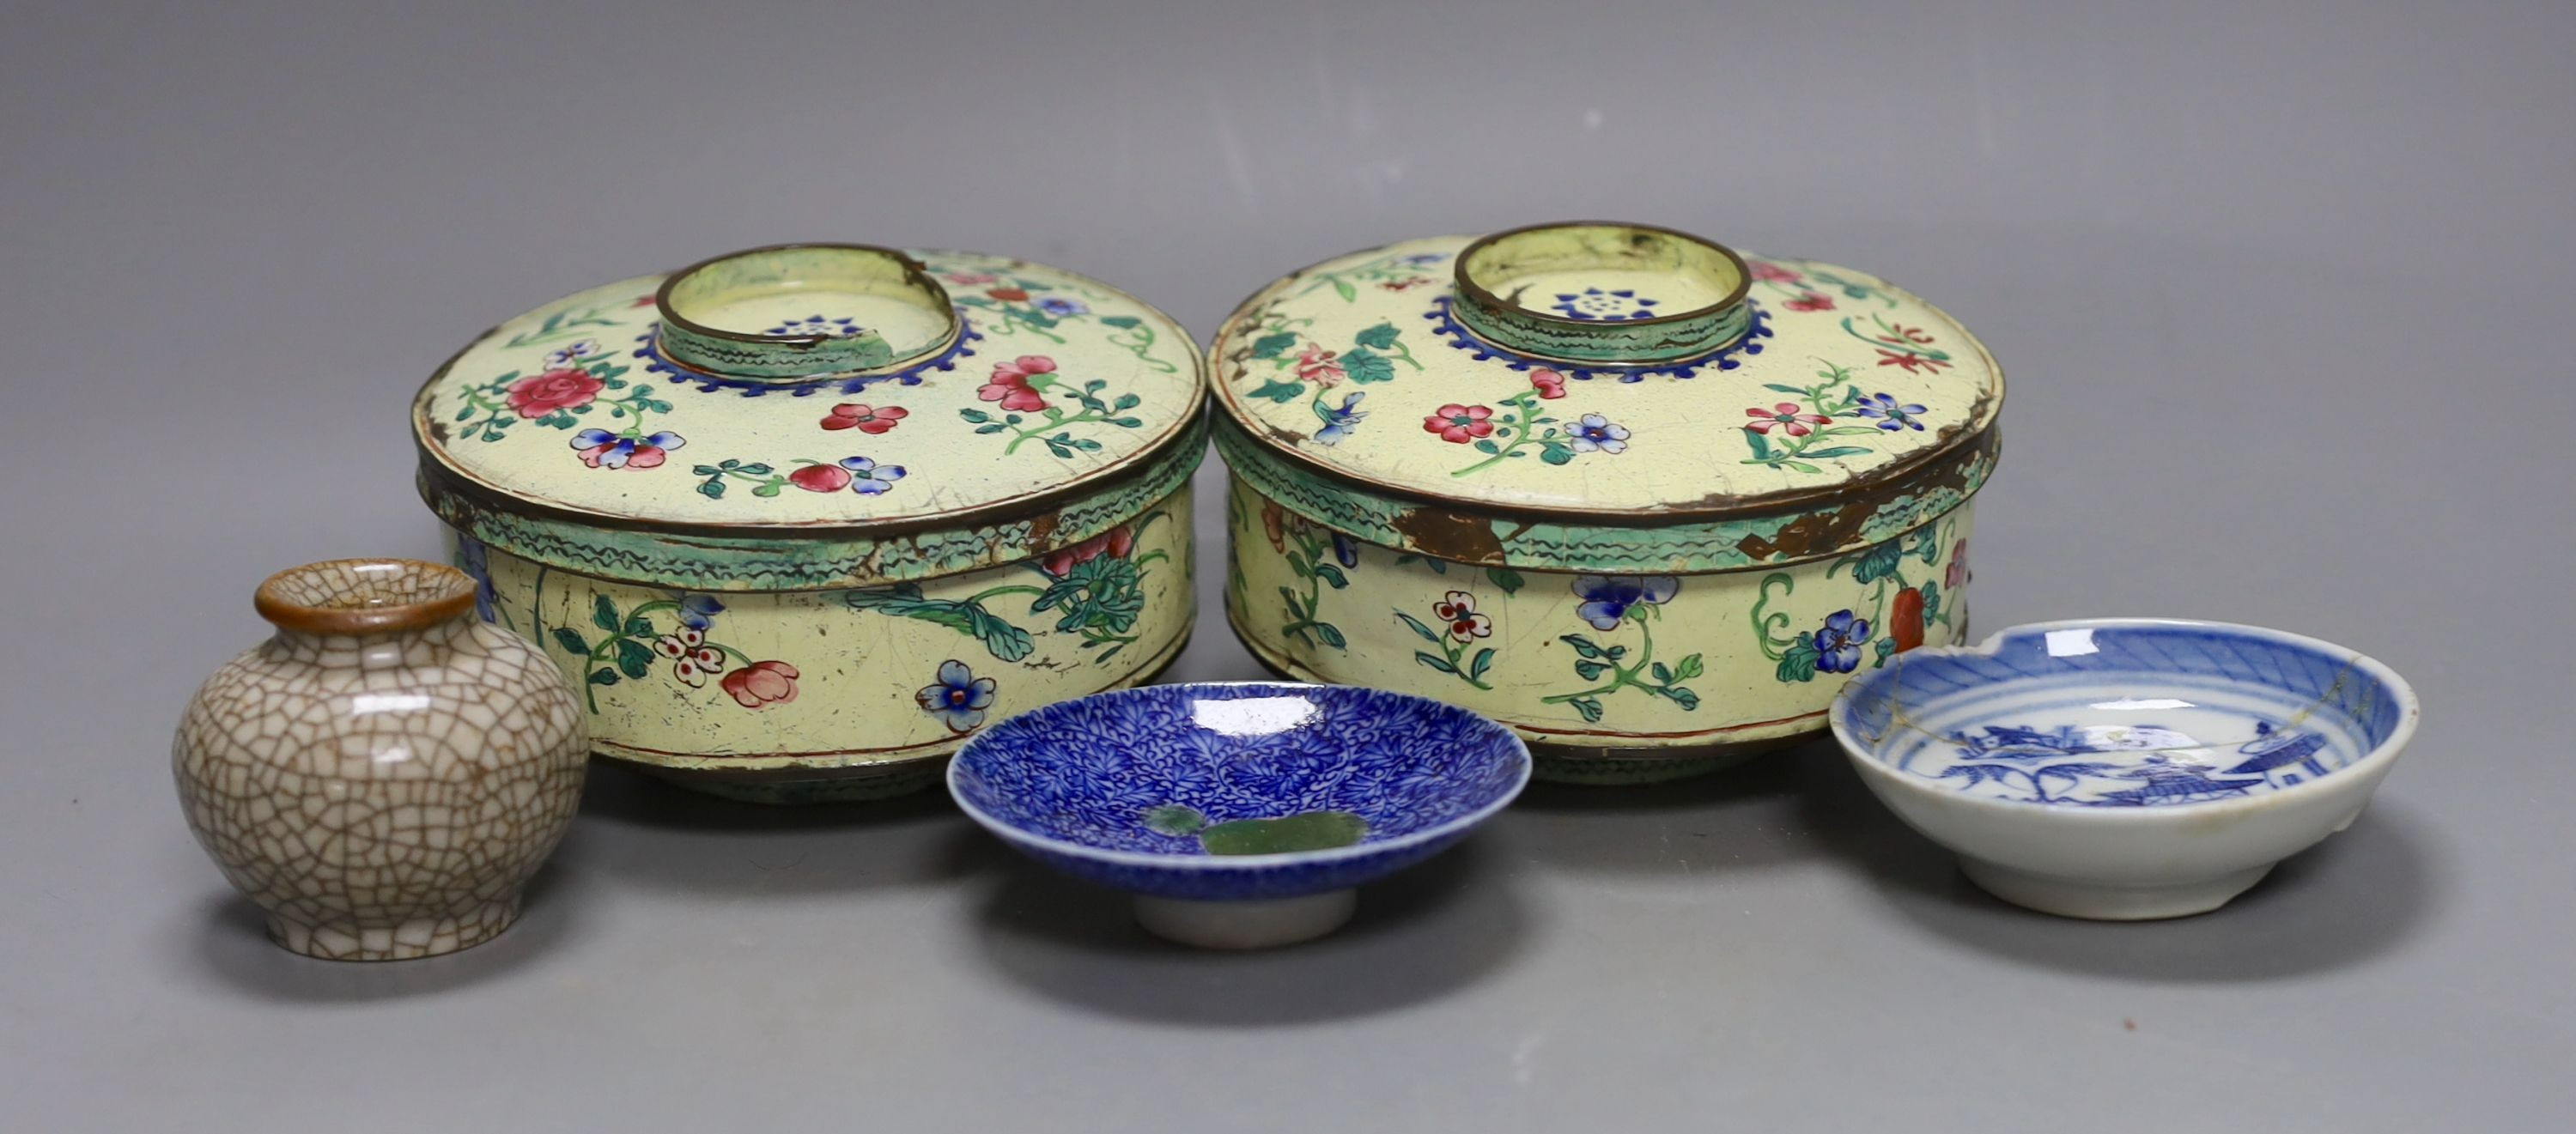 A pair of 18th/19th century Chinese Canton enamel bowls and covers, together with a Chinese miniature crackle glaze vase and other ceramics (5)